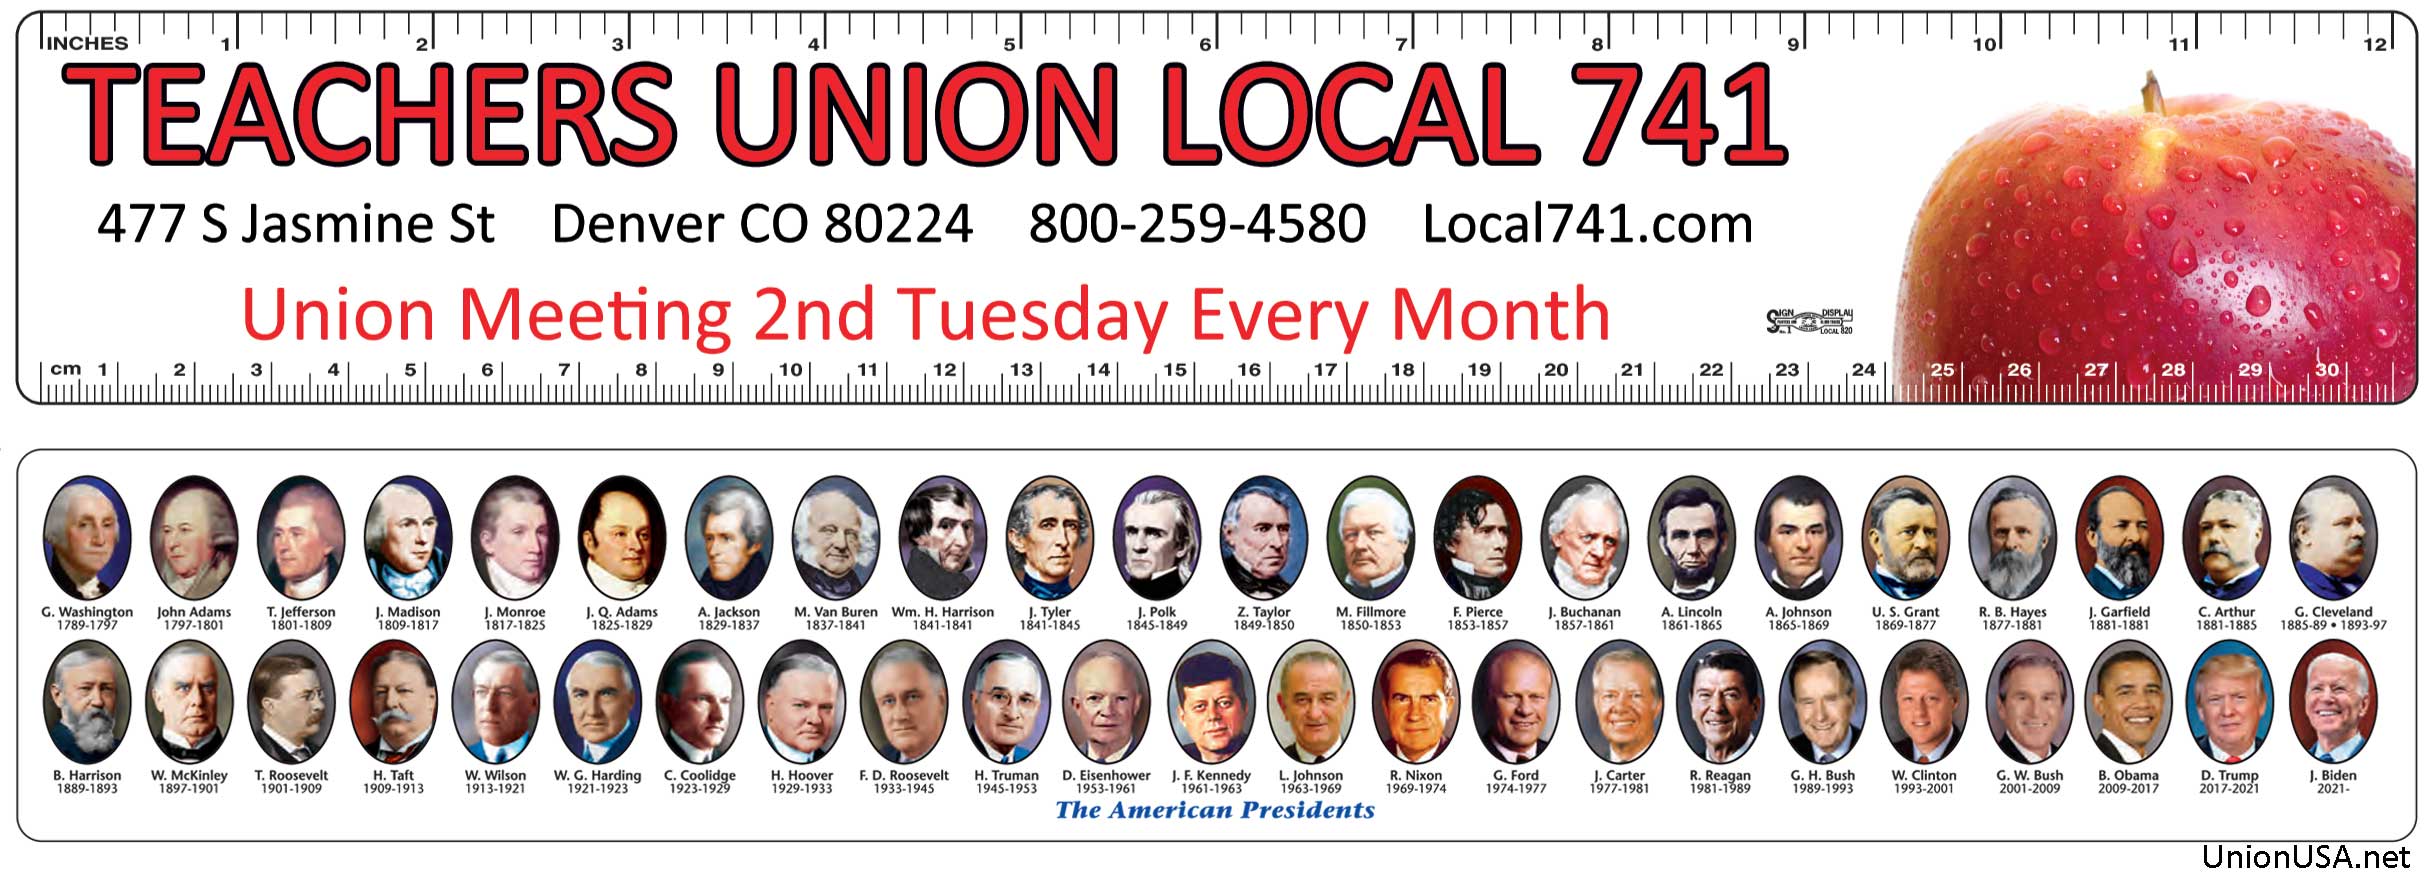 Union Presidential Rulers, Union Made & Union Printed